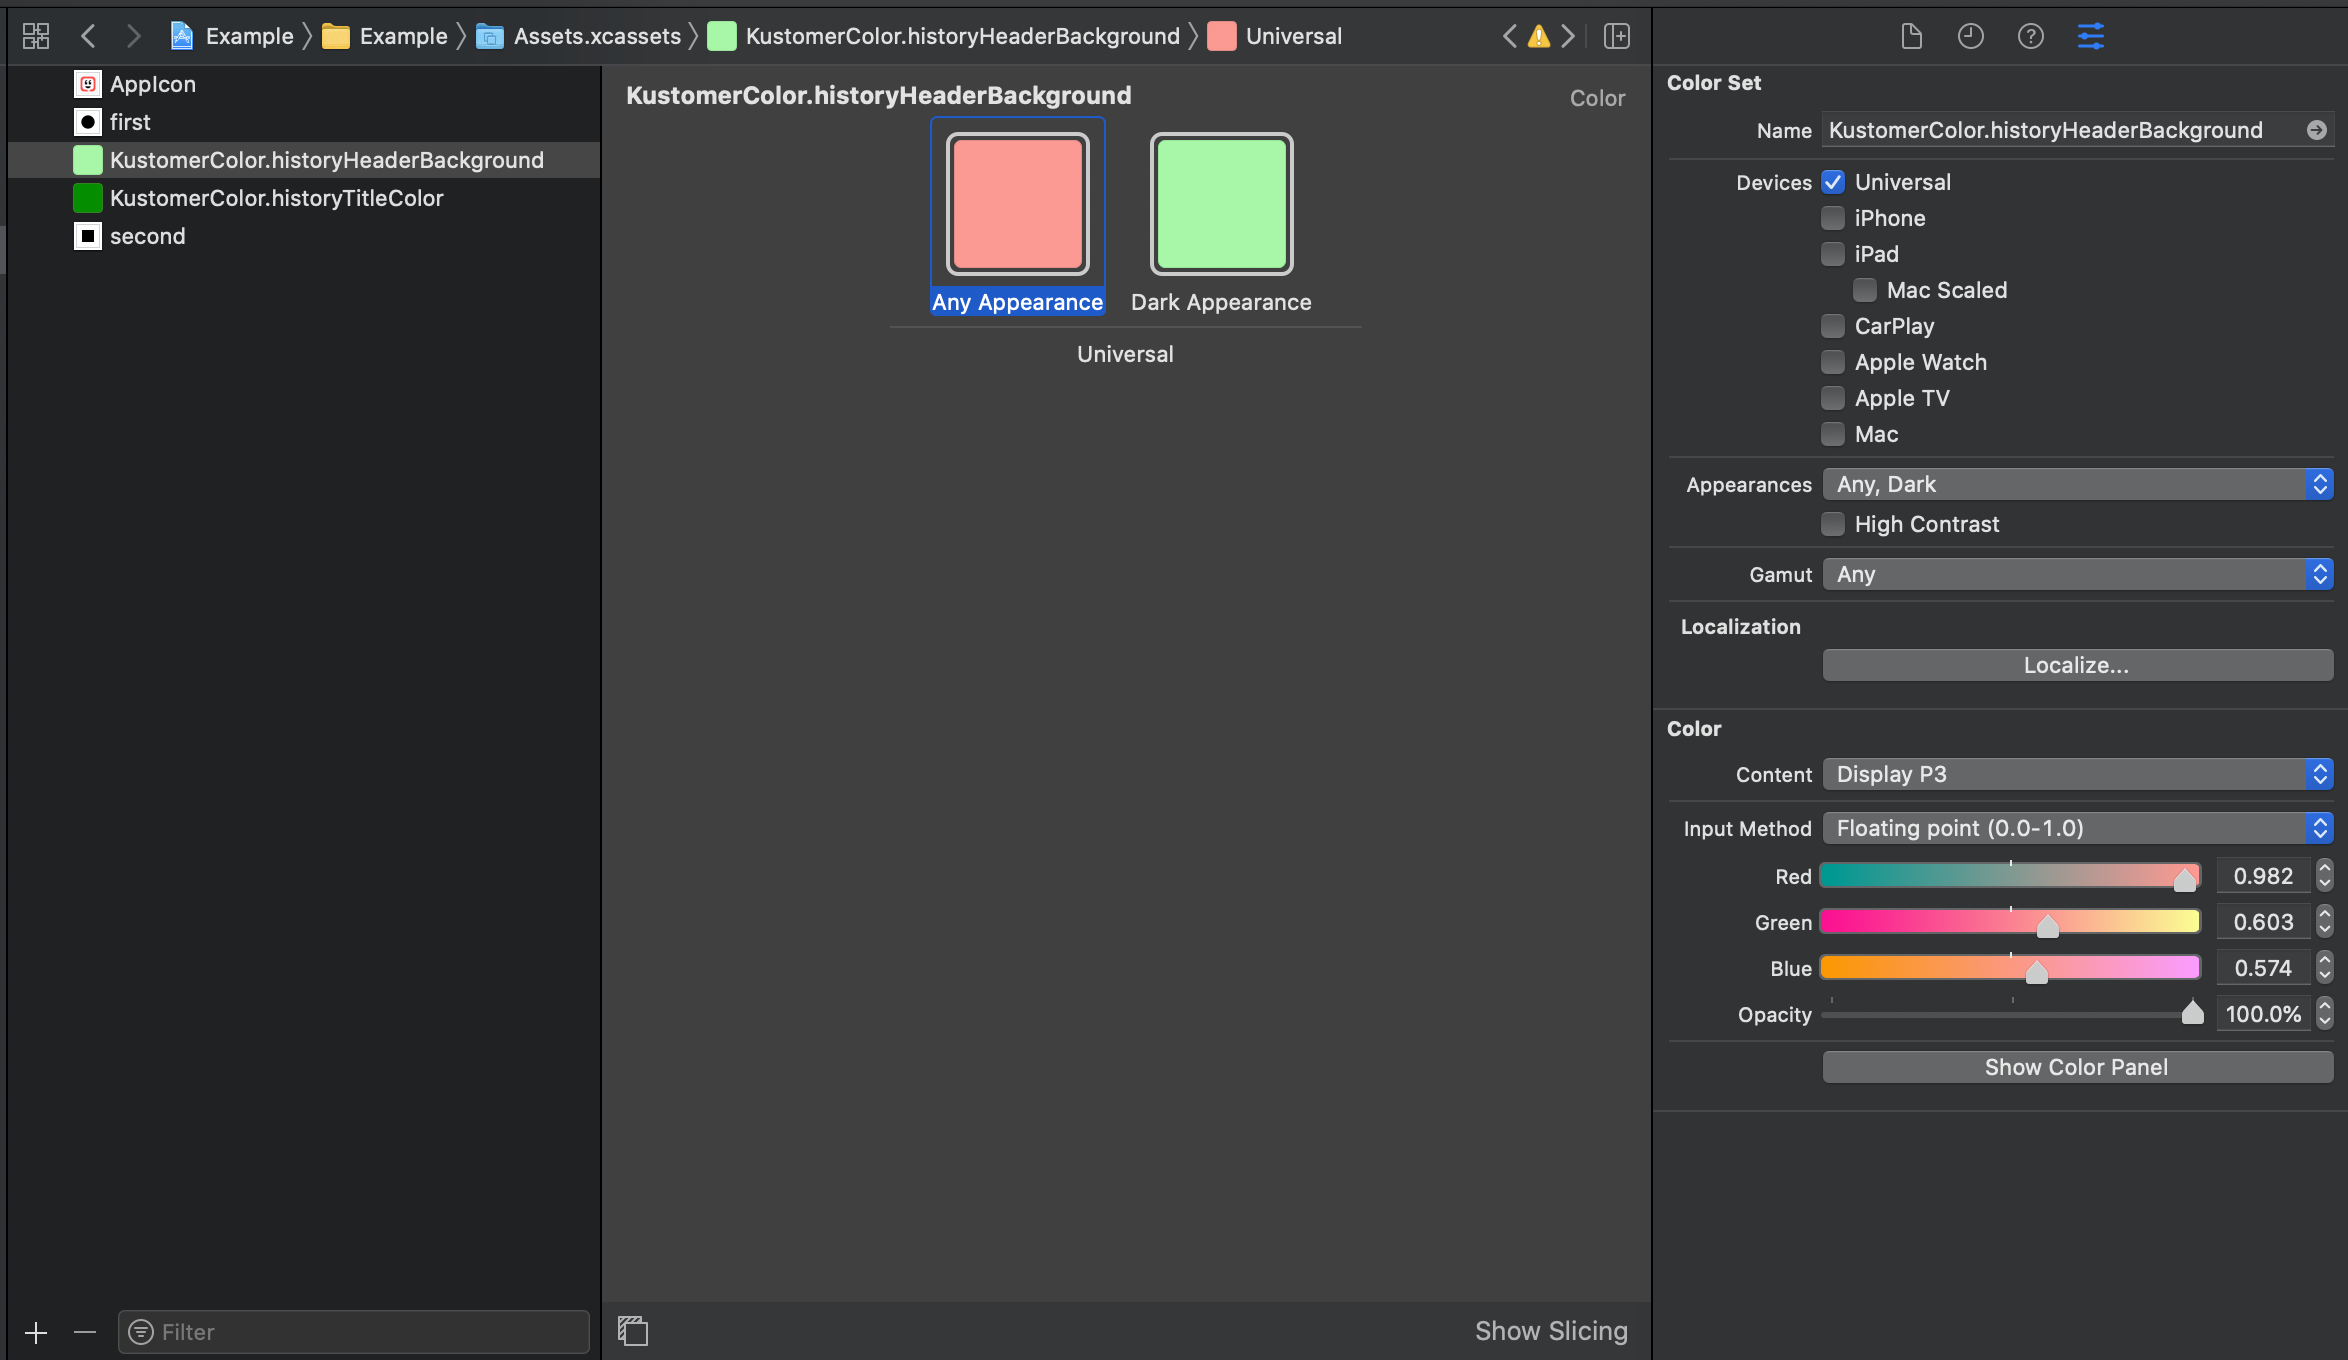 Color set named `KustomerColor.historyHeaderBackground` in Xcode asset catalog. This color set specifies the header background of the chat history view.